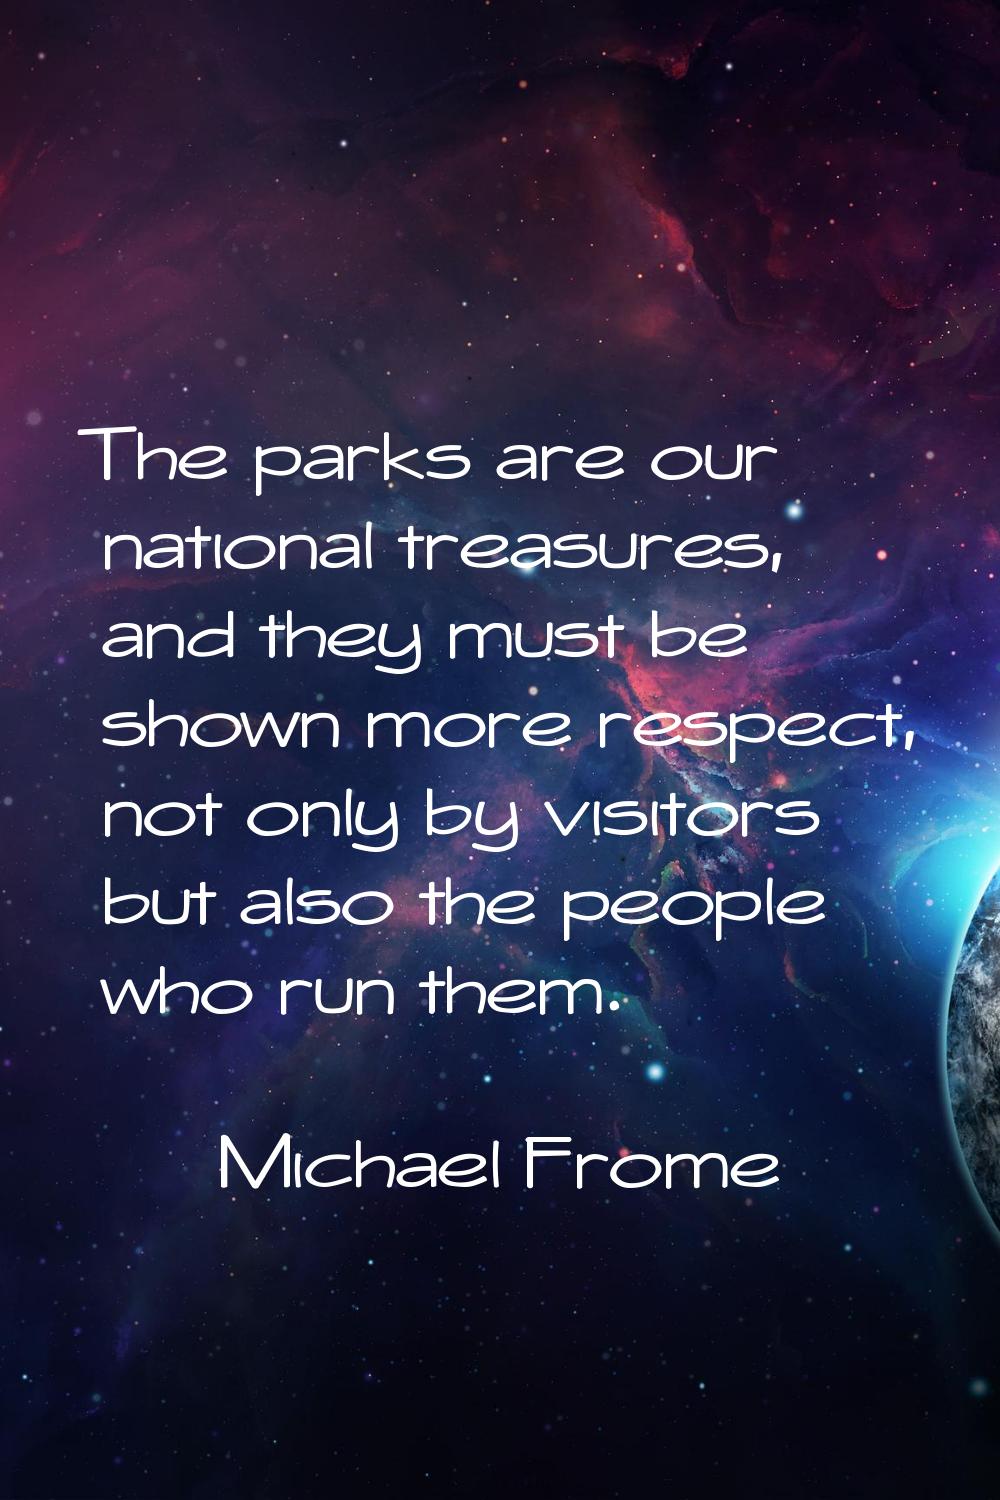 The parks are our national treasures, and they must be shown more respect, not only by visitors but